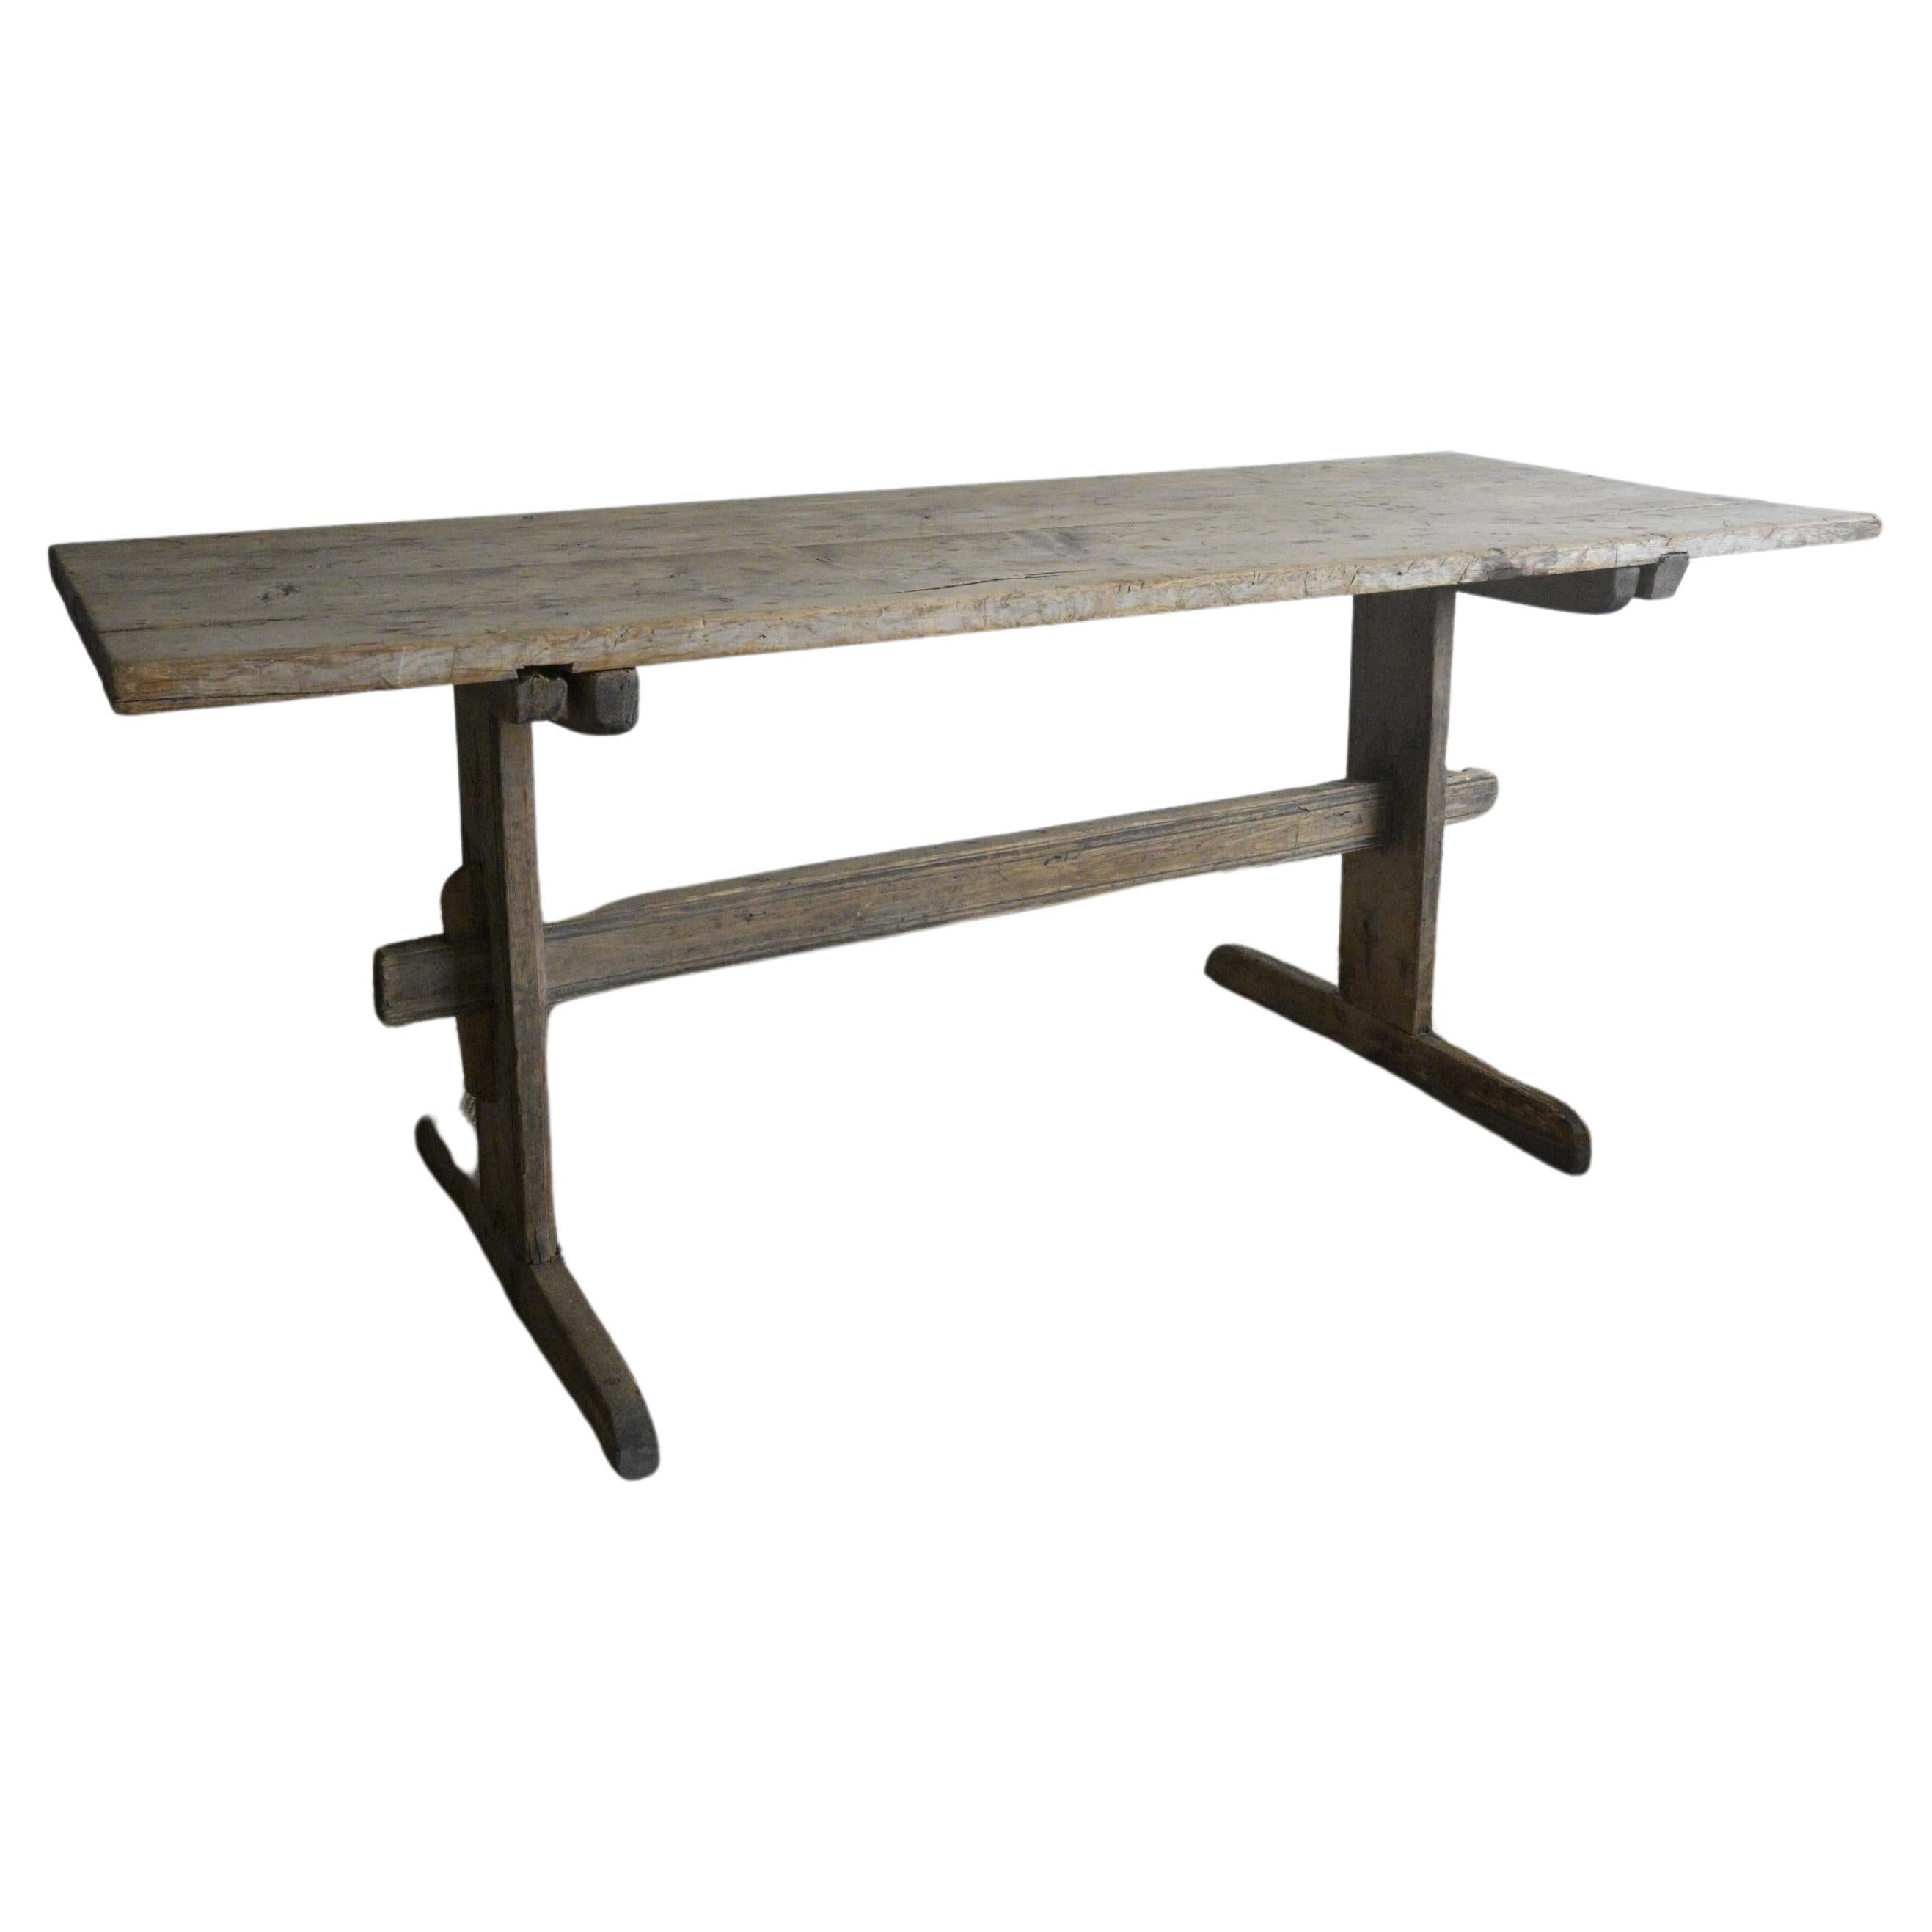 Late 18th-century long Trestle Table from Sweden For Sale